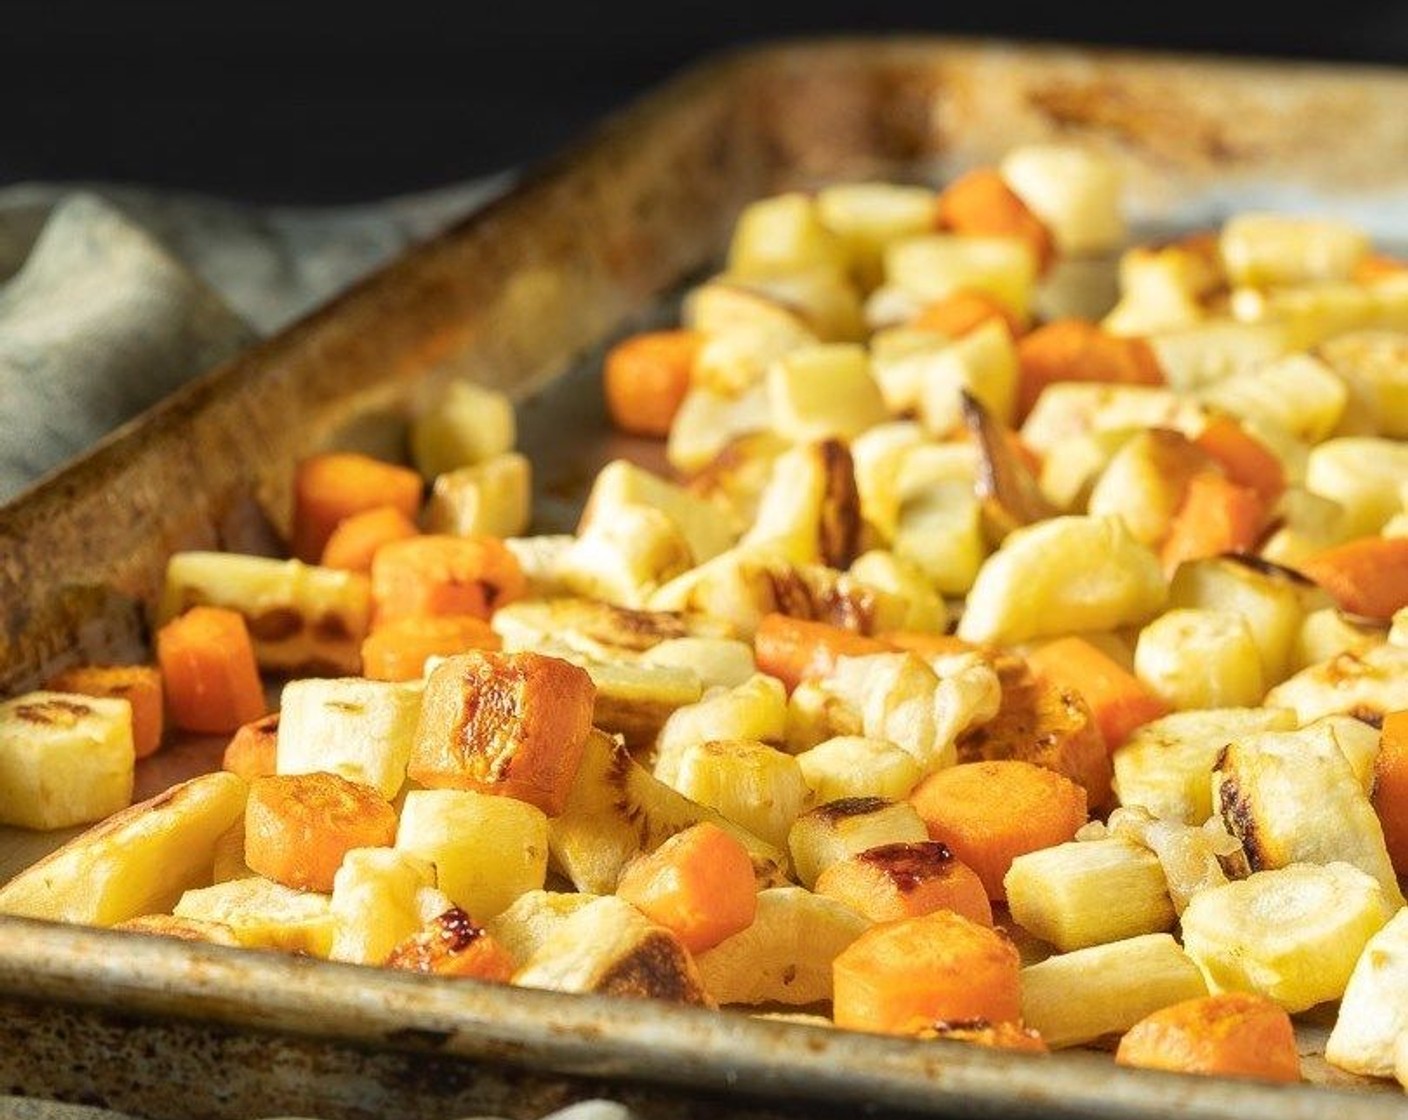 step 2 Toss Parsnips (2 1/2 cups), Carrots (1 1/2 cups), Apple (1) and Garlic (4 cloves) with Olive Oil (1 Tbsp). Spread out on a large baking tray in a single layer. Roast for 40 minutes, flipping once after 20 minutes.